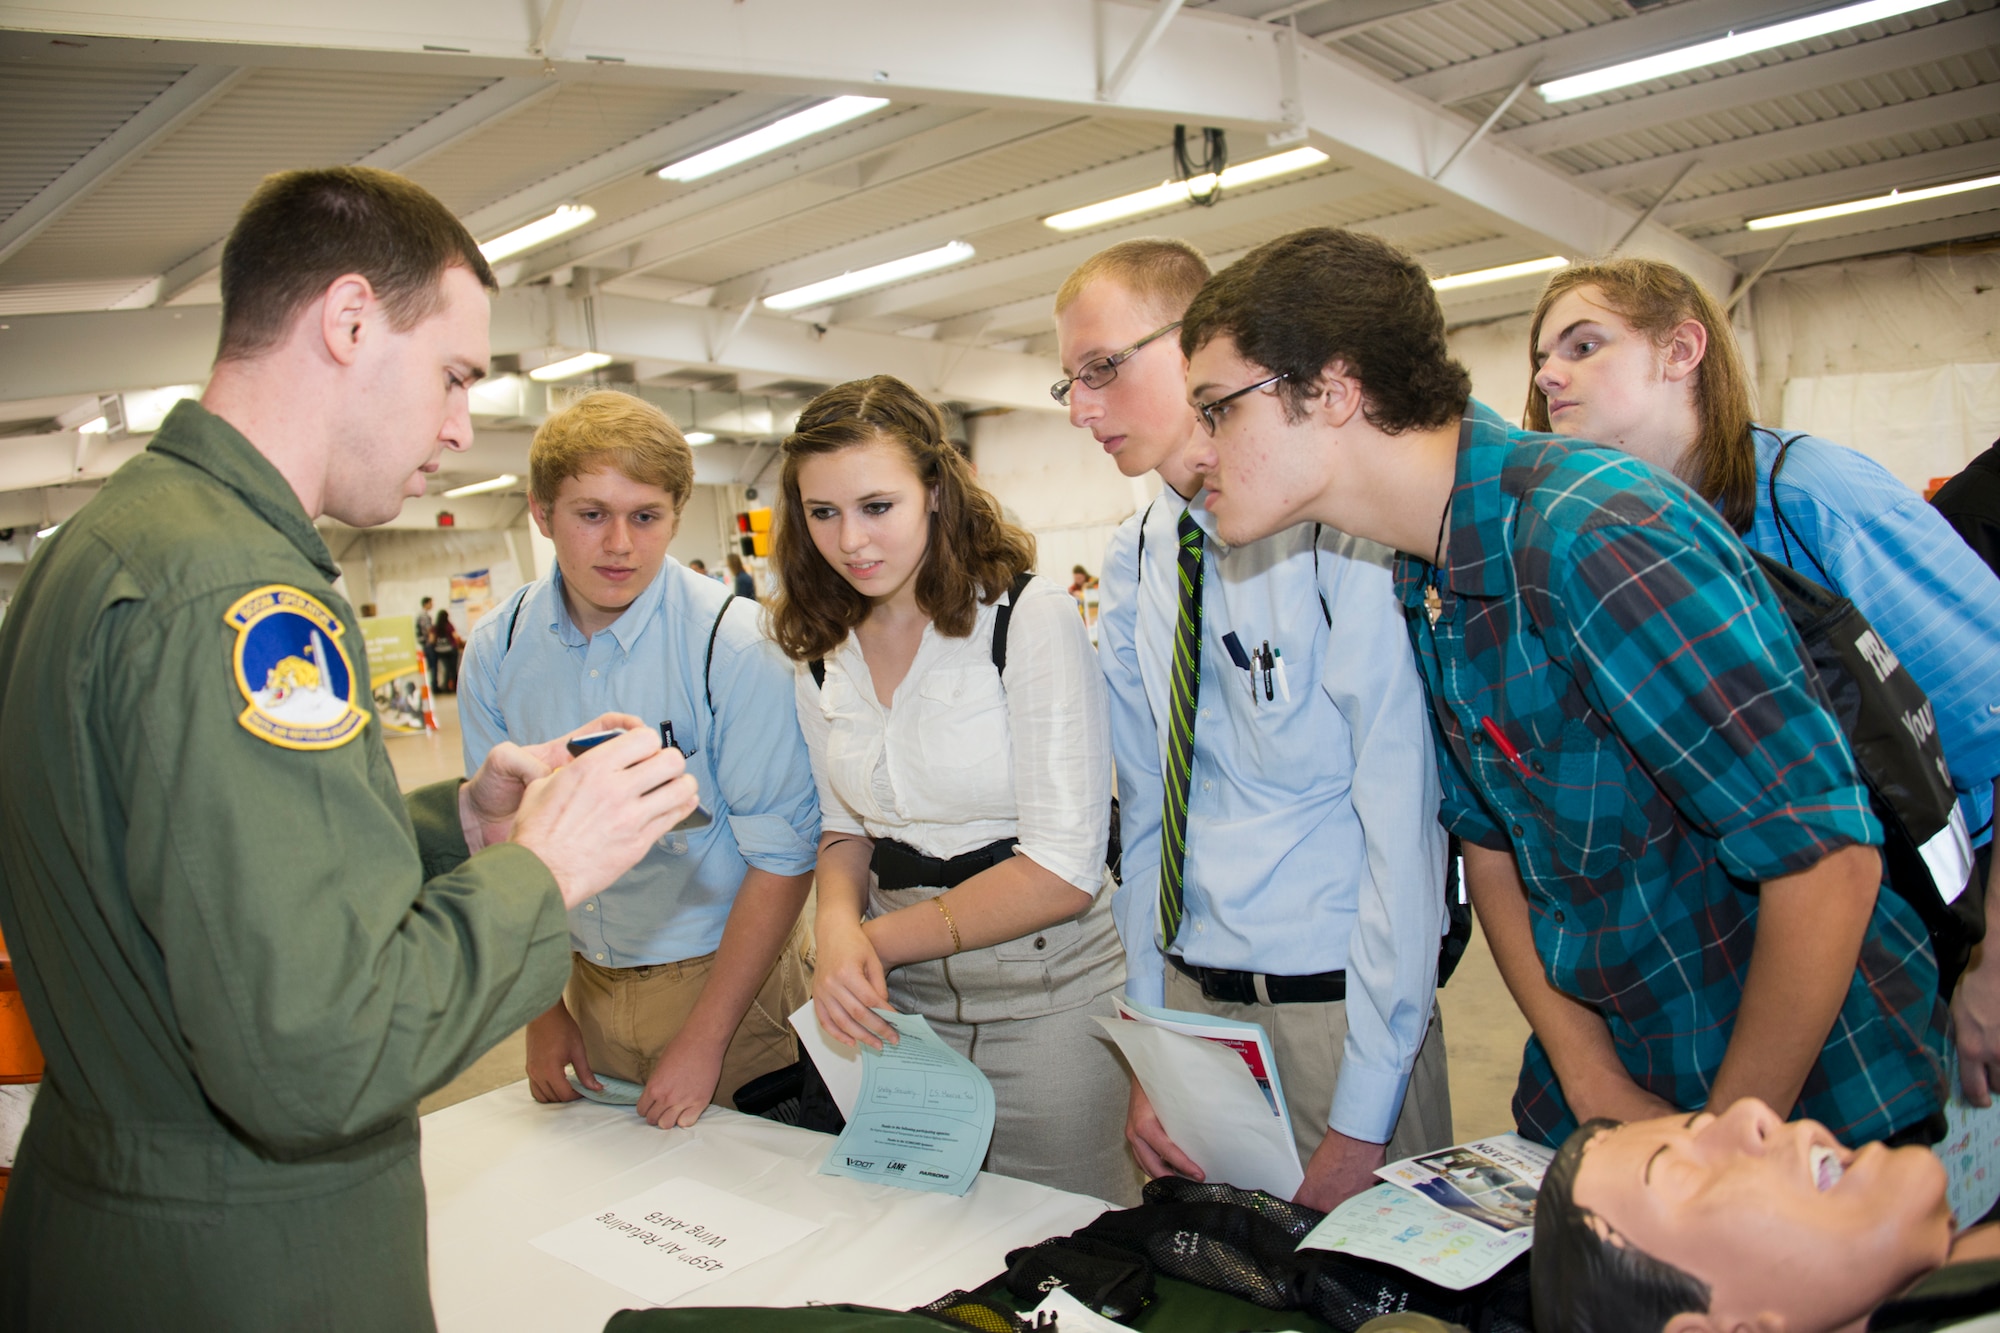 Tech. Sgt. Matt Oberlin, 756th Refueling Squadron boom operator, inform students about a career as boom operator at the 11th annual Virginia Department of Transportation Career Fair at Prince William County Fairgrounds Oct. 8, 2015. The event, which drew more than 1,300 students from the Prince William County area, provided an opportunity for youths to learn about careers in the transportation industry. The 459th was on hand to discuss potential career paths as pilots, boom operators and inflight medics. (U.S. Air Force photo by Staff Sgt. Kat Justen)